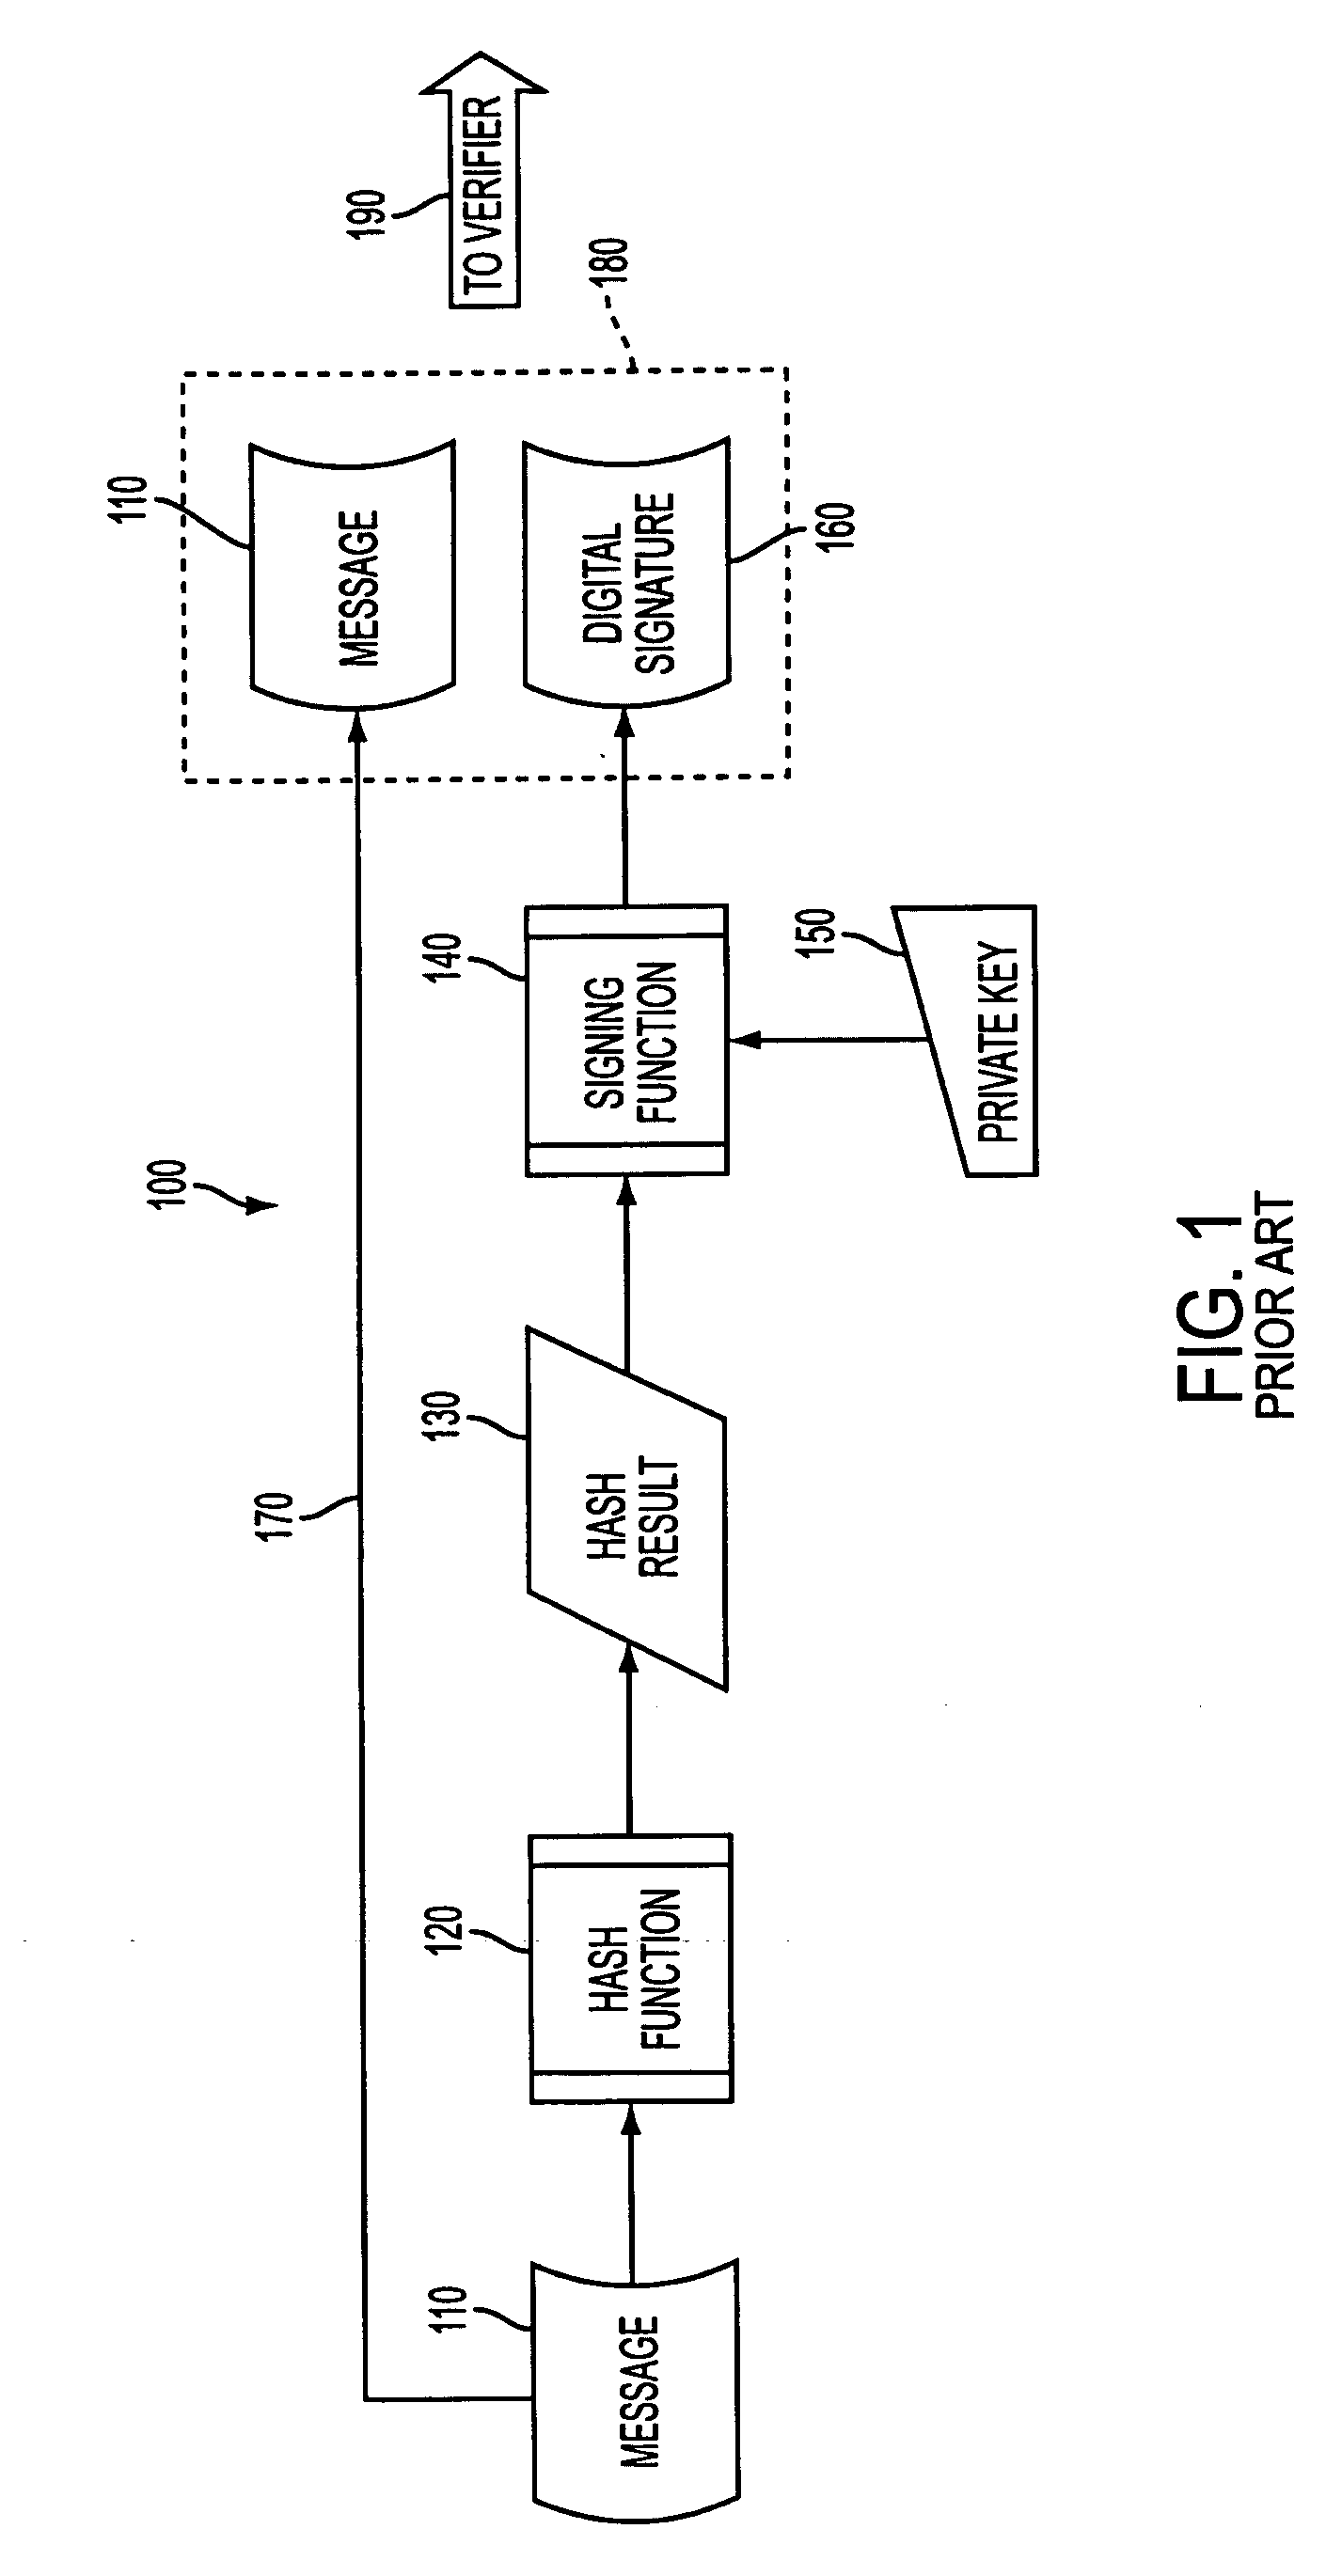 System and method for providing trusted time in content of digital data files